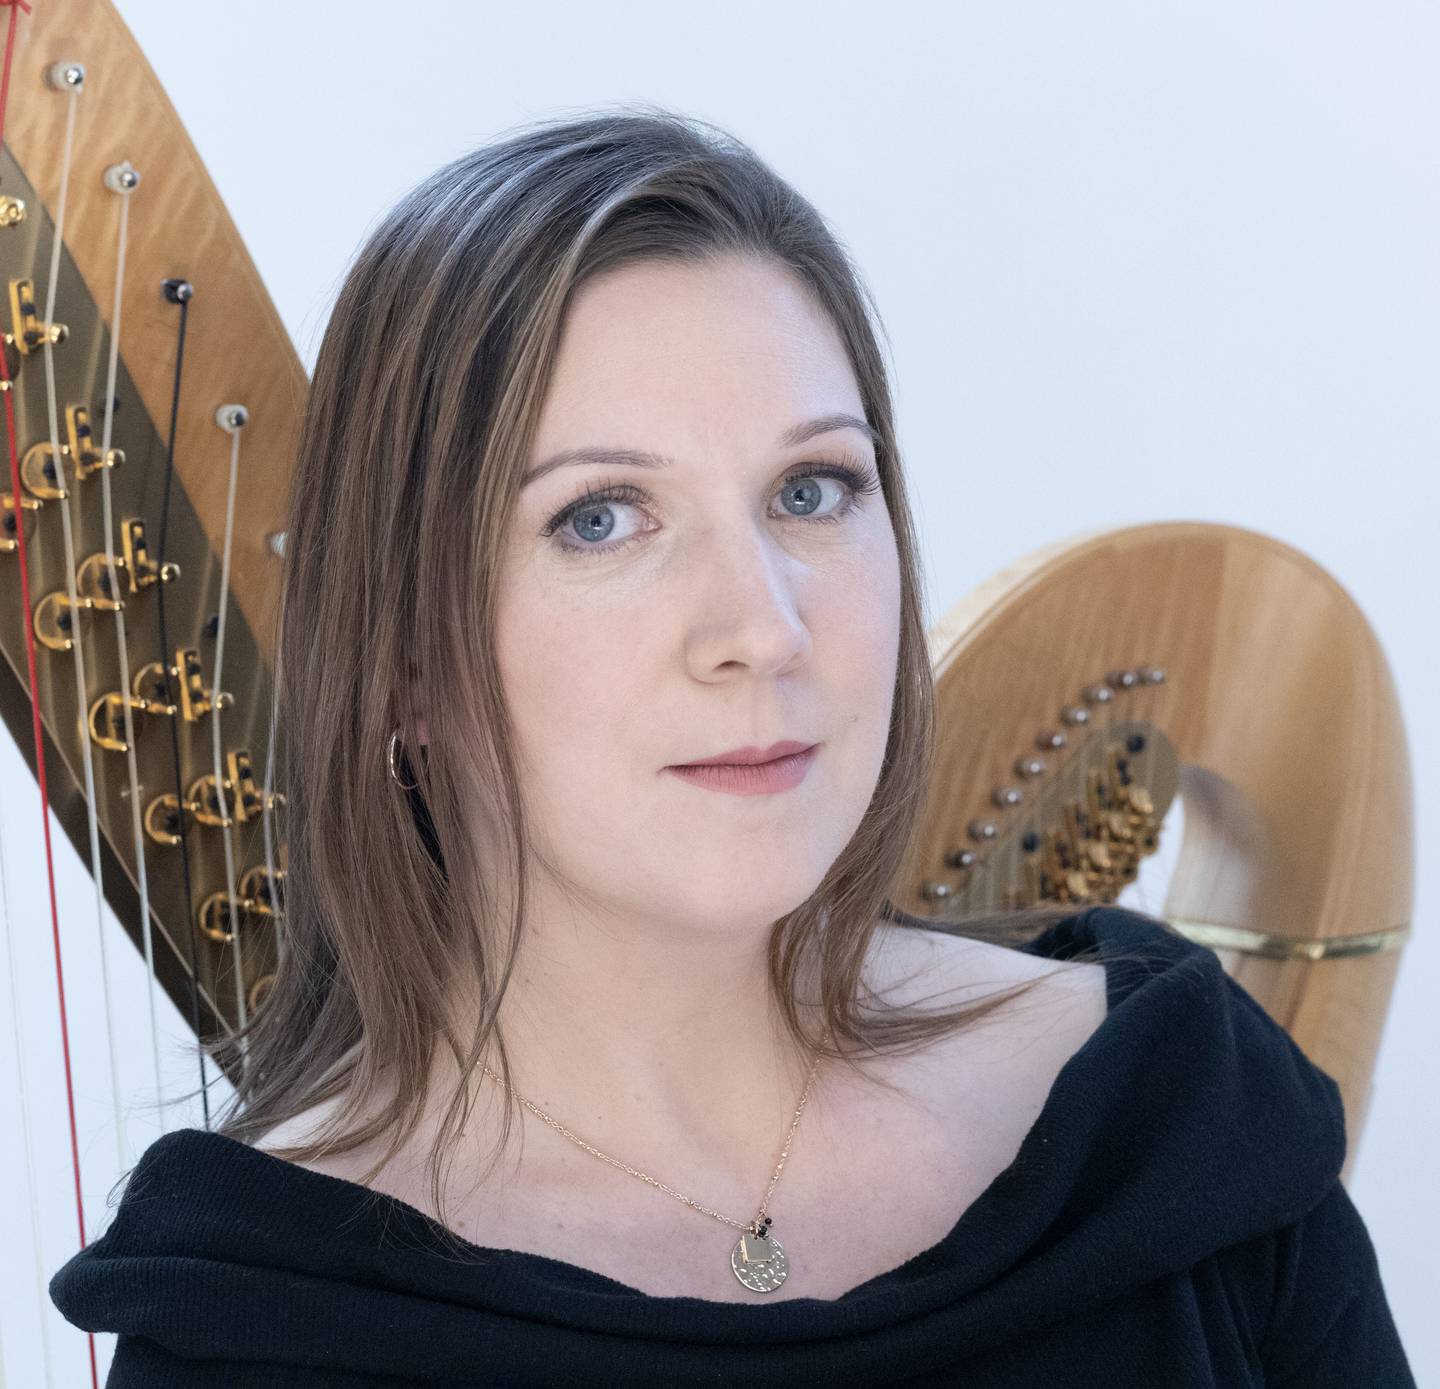 Harpist Erin Freund will appear with the St. Charles Singers.